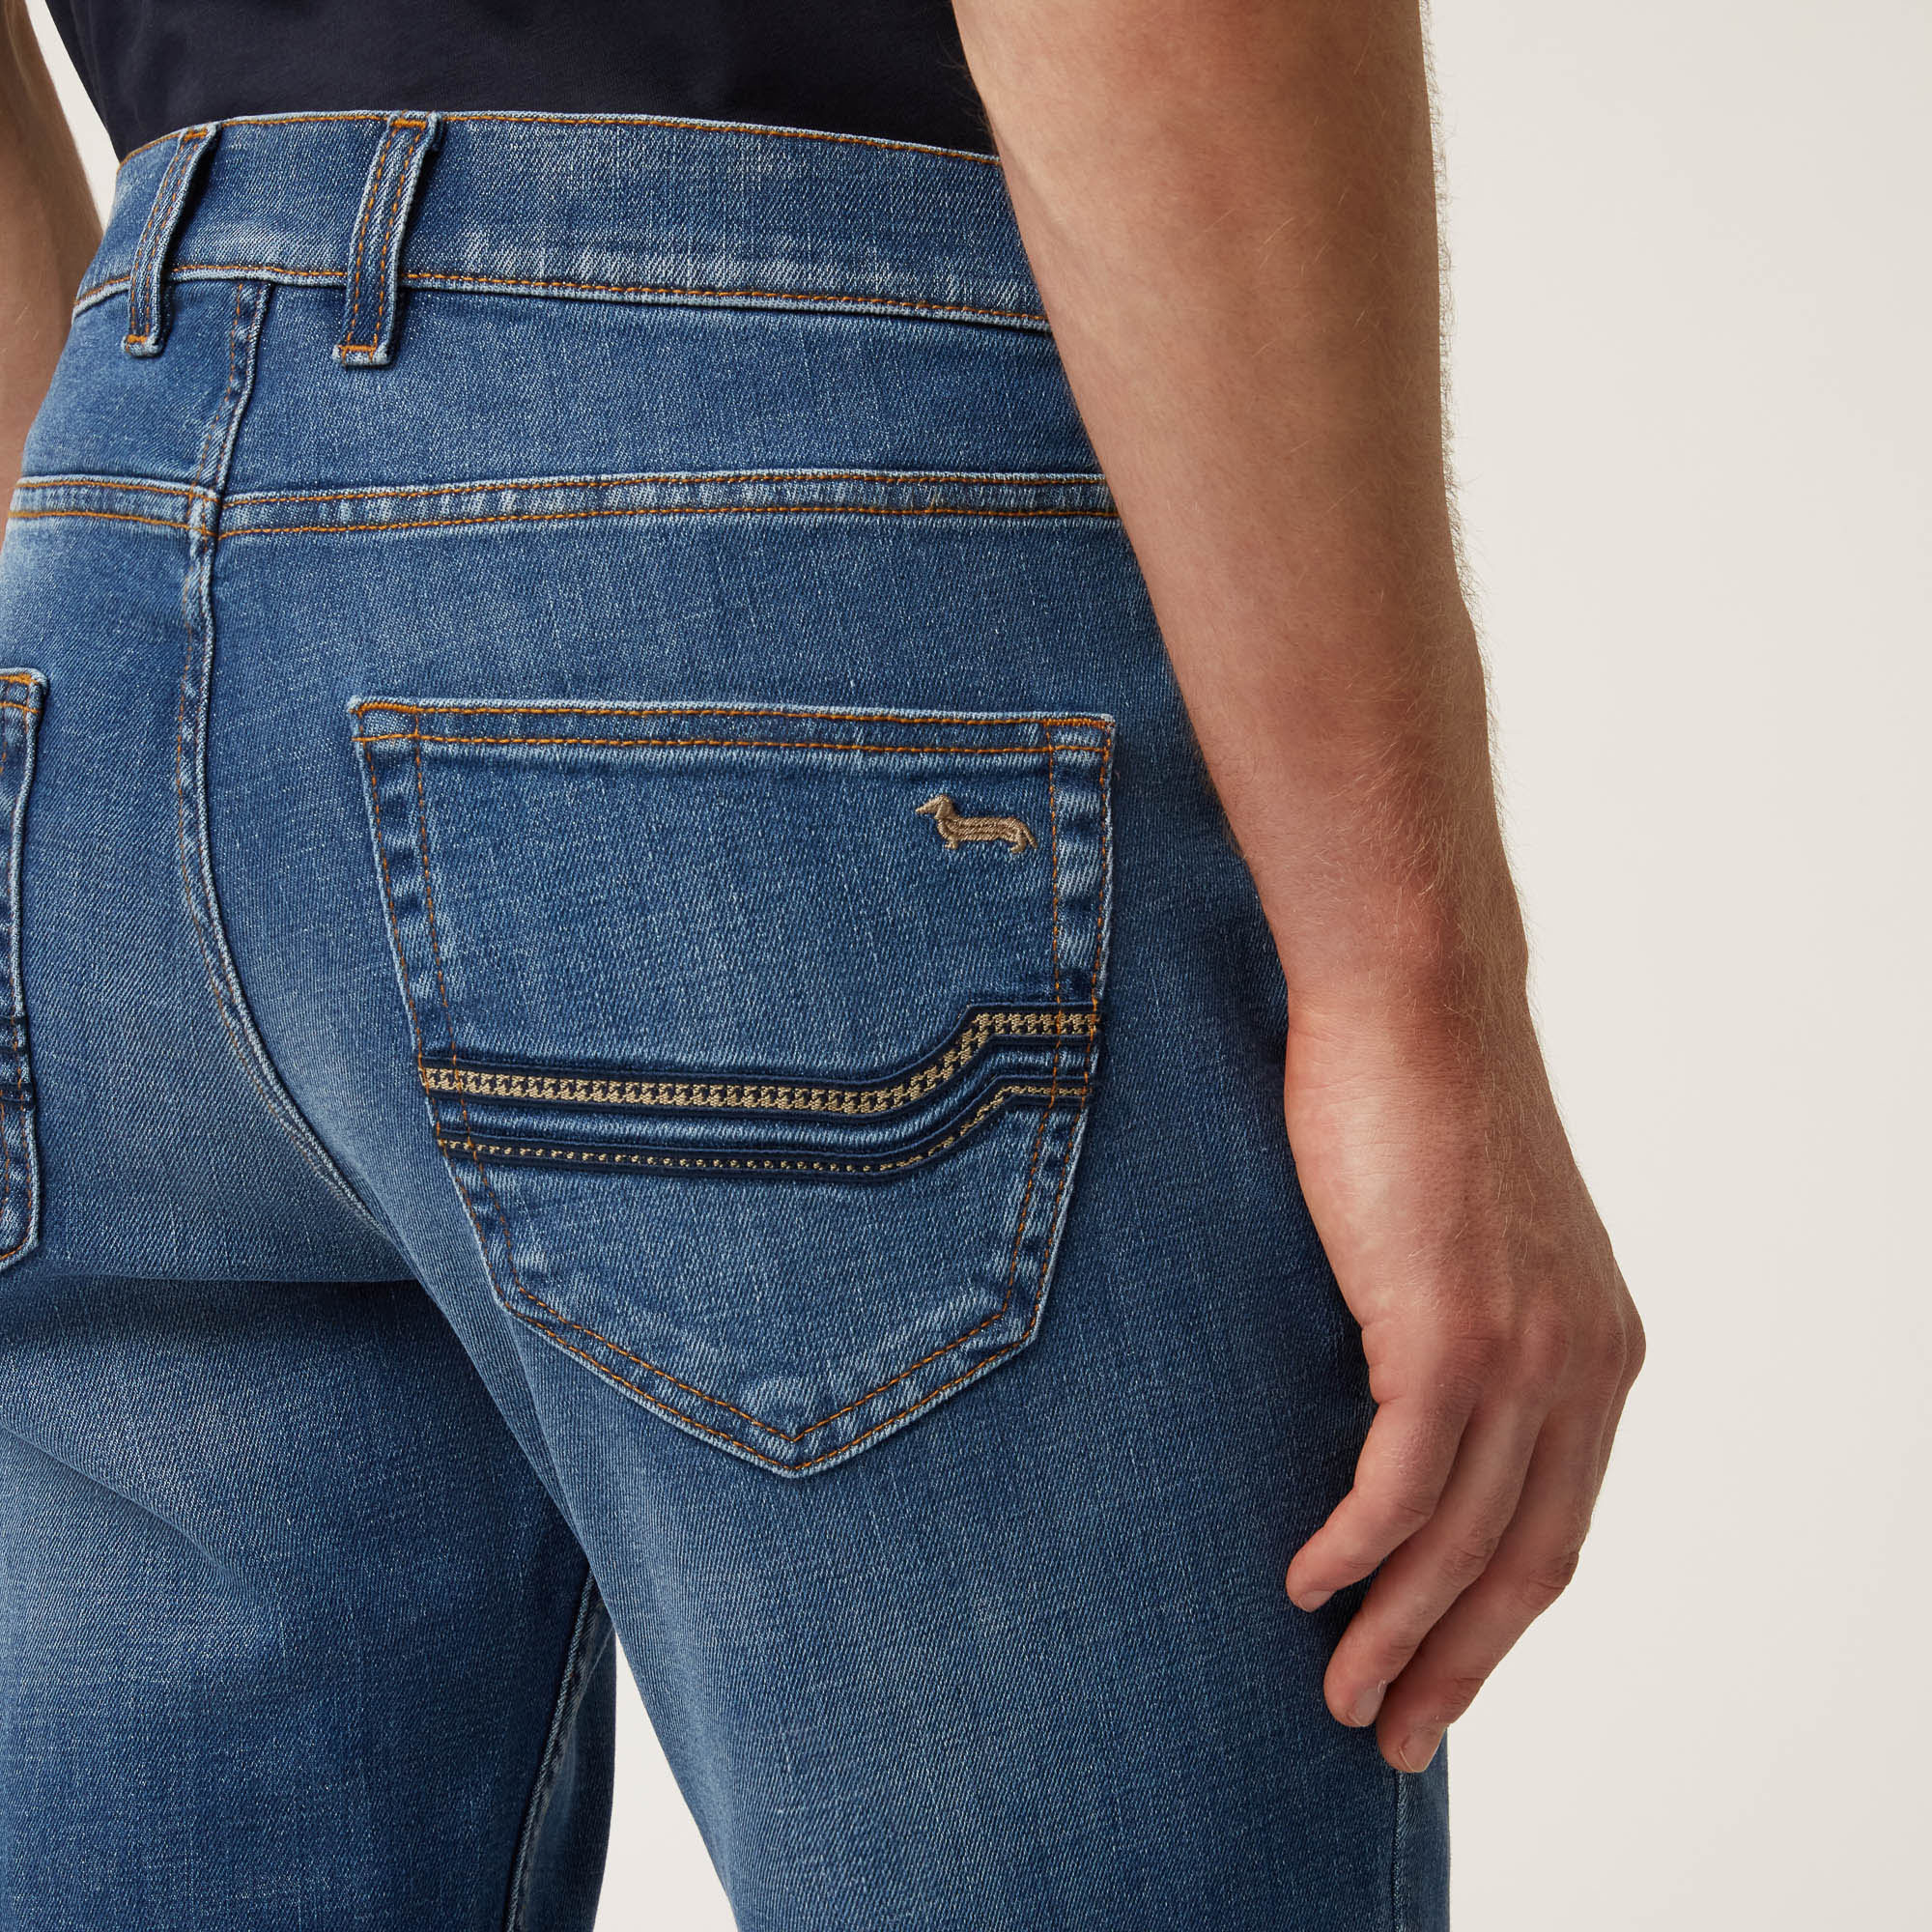 Five-Pocket Denim Jeans With Embroidery On The Back